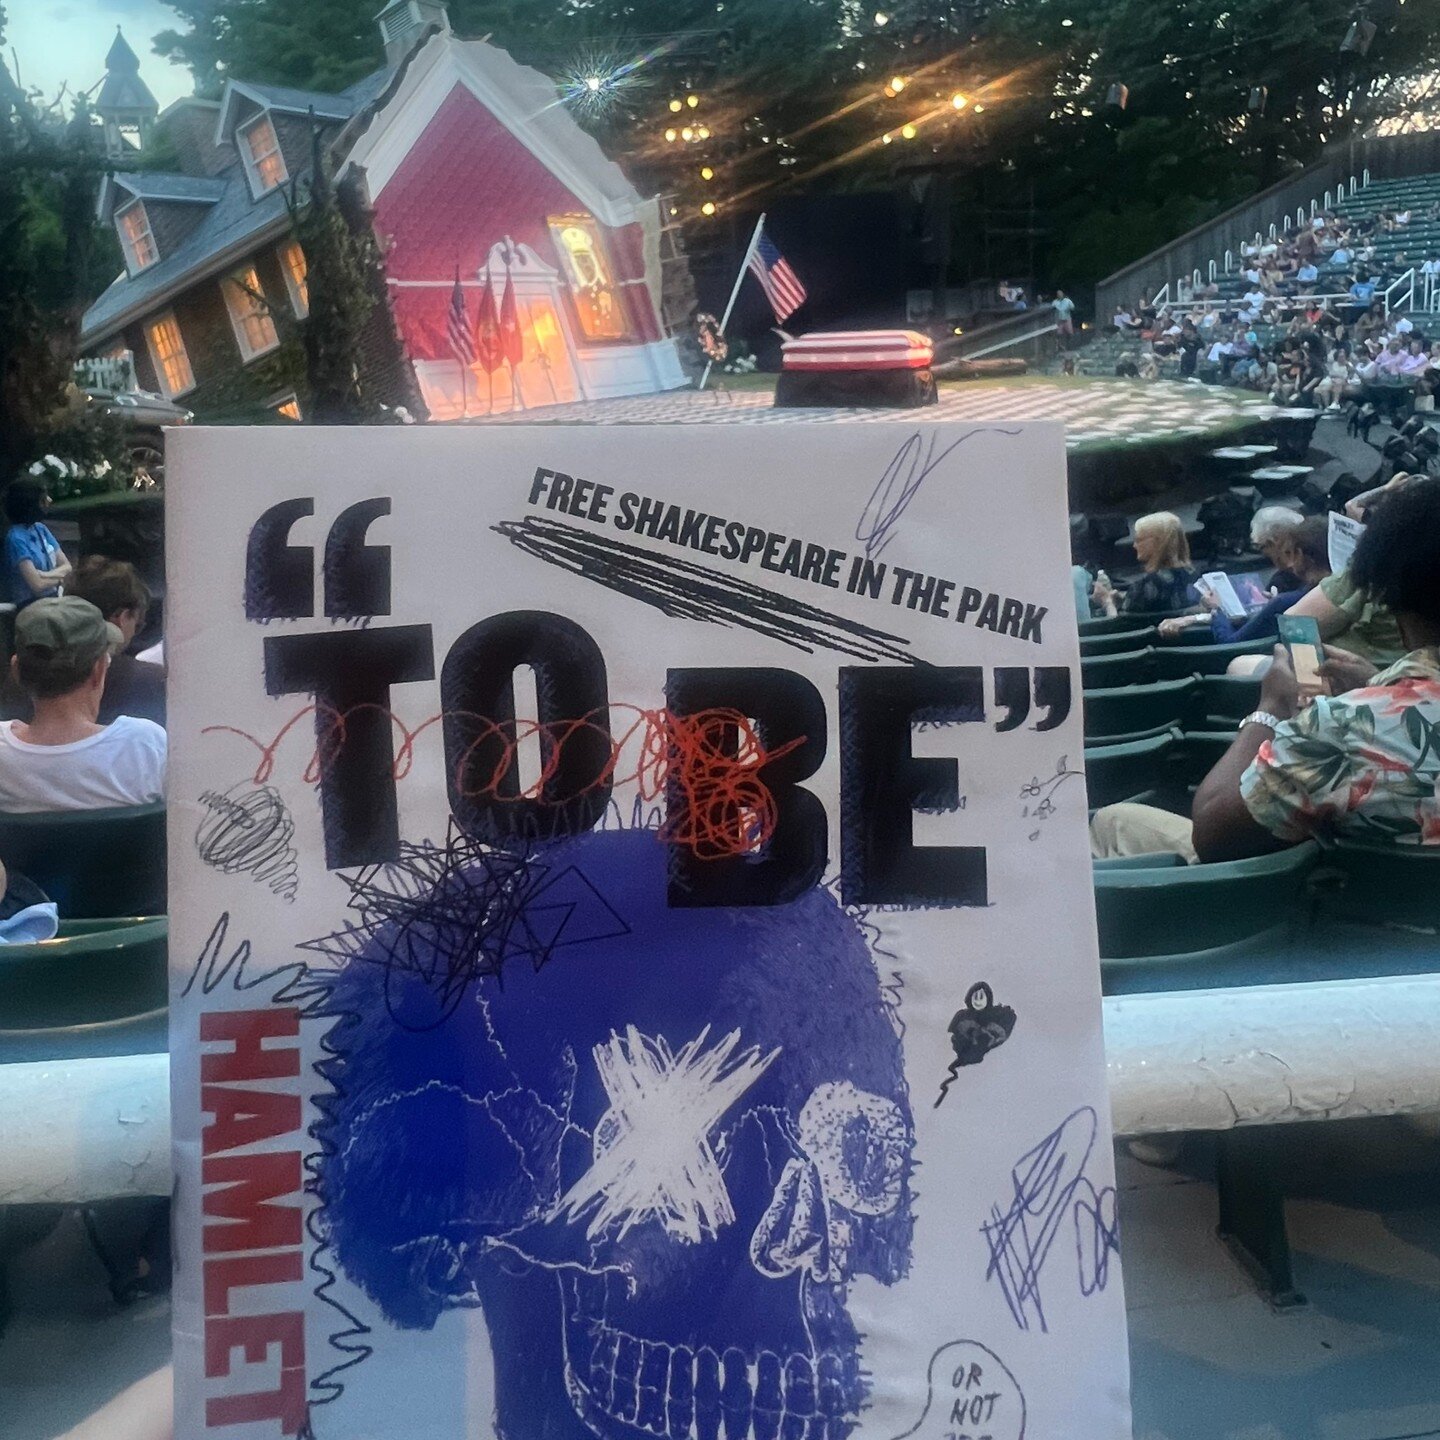 @ablanksonwood @shakespeare.in.the.park 
@publictheaterny 

The rains came at intermission but saw the good parts. Spoiler alert: it doesn't end well.

#newyork #newyorkcity #centralpark #shakespeare #hamlet #broadway #theatre #newyorktheatre